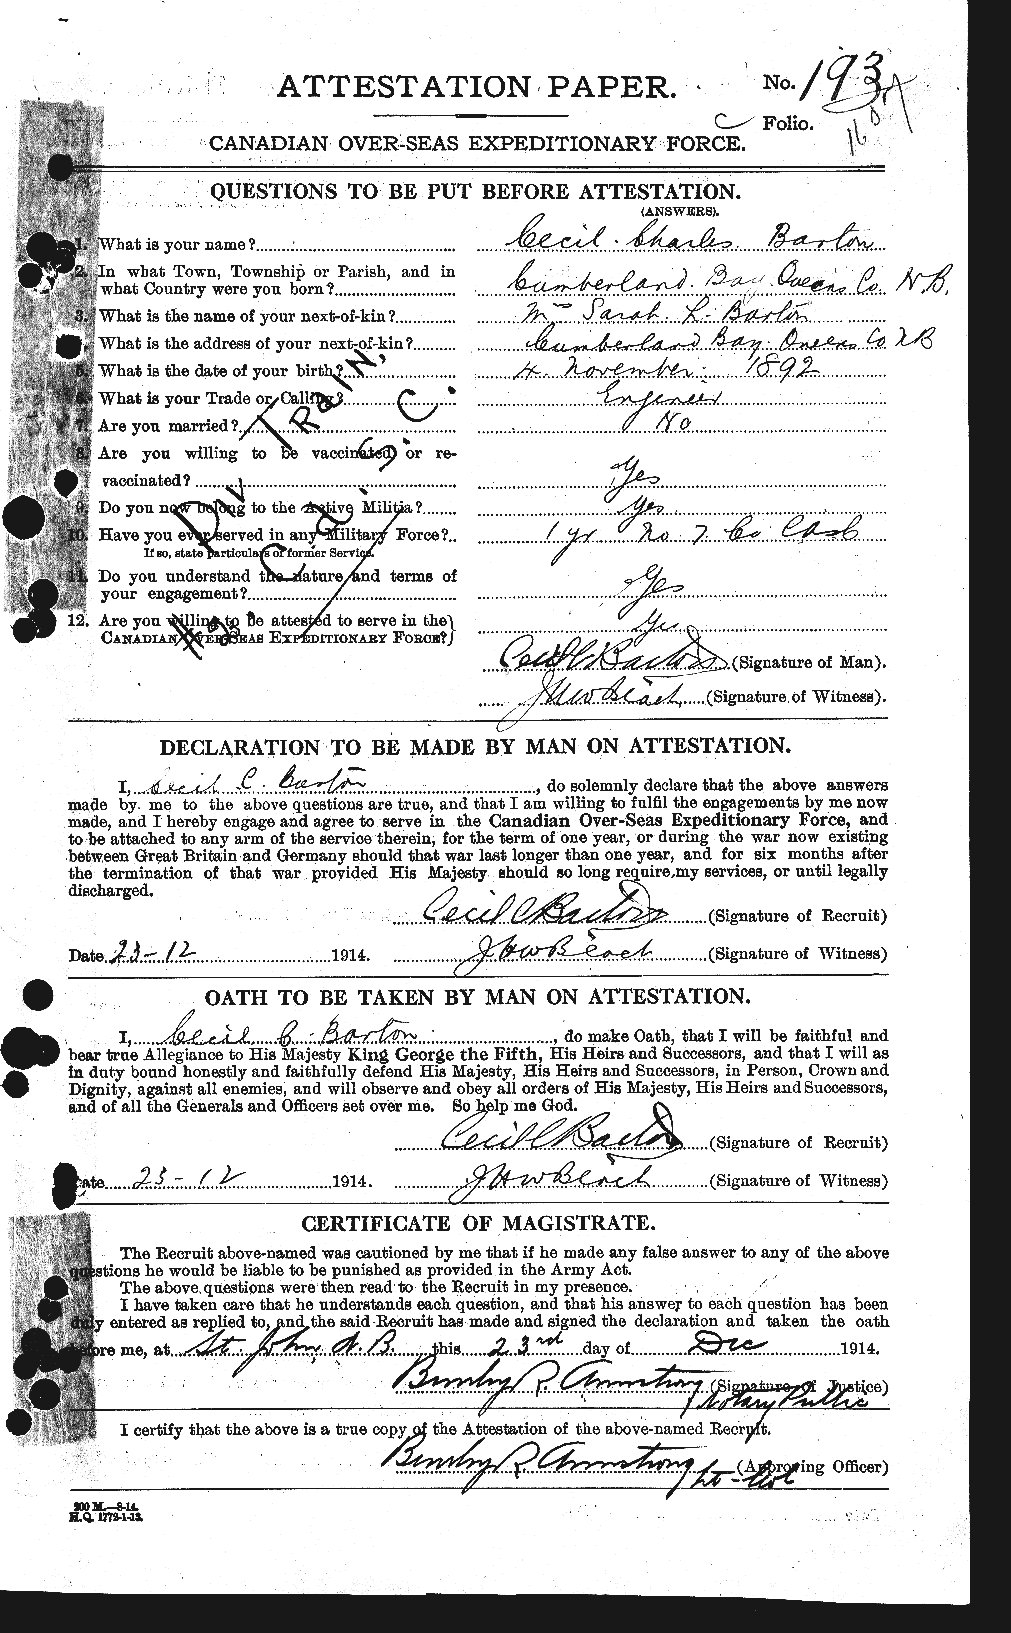 Personnel Records of the First World War - CEF 221699a